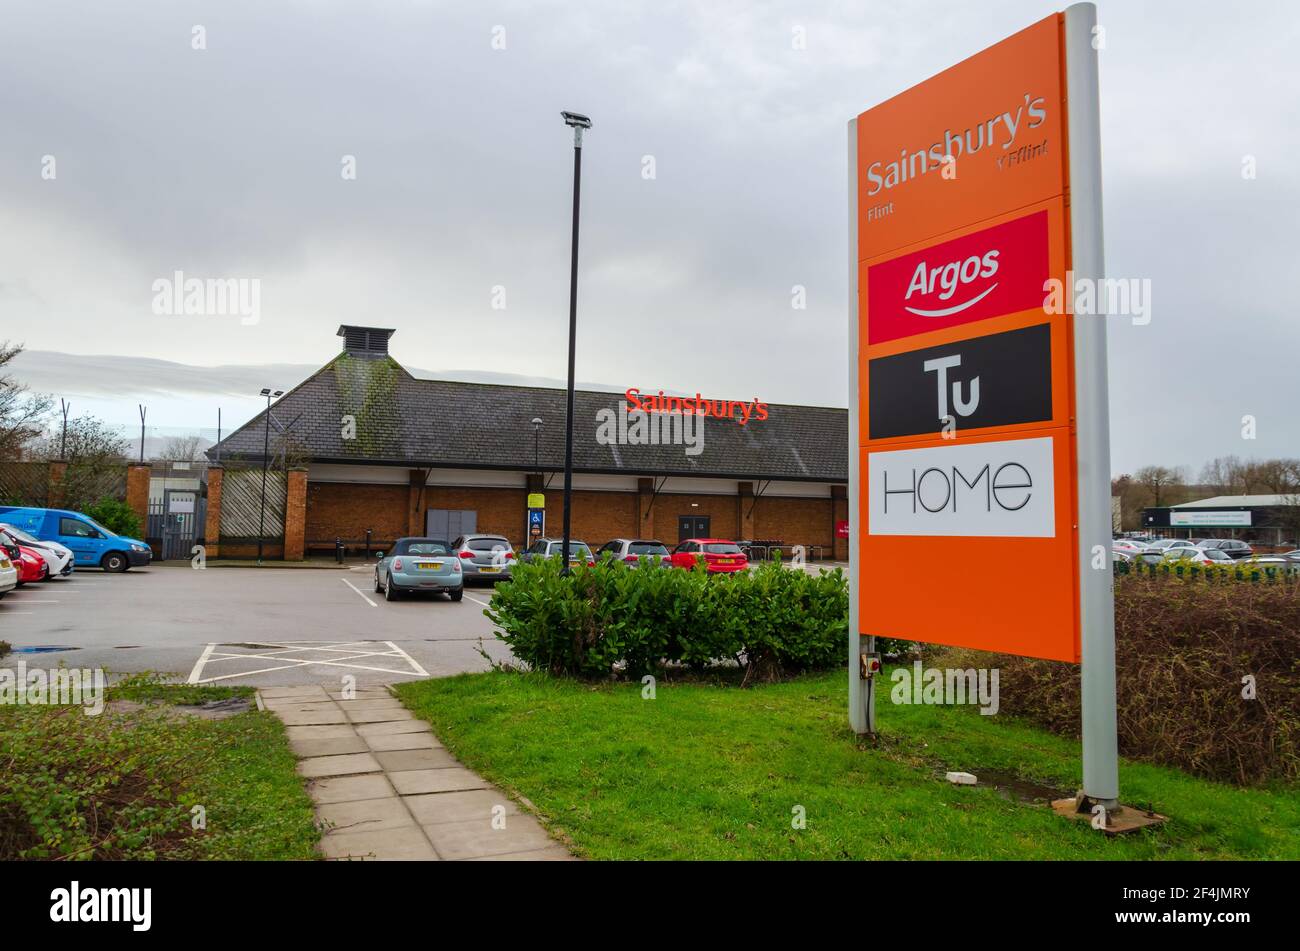 Flint; UK: Jan 28, 2021: Signage beside a Sainsbury's supermarket shows some of the instore brands, including Argos who recently relocated to inside t Stock Photo